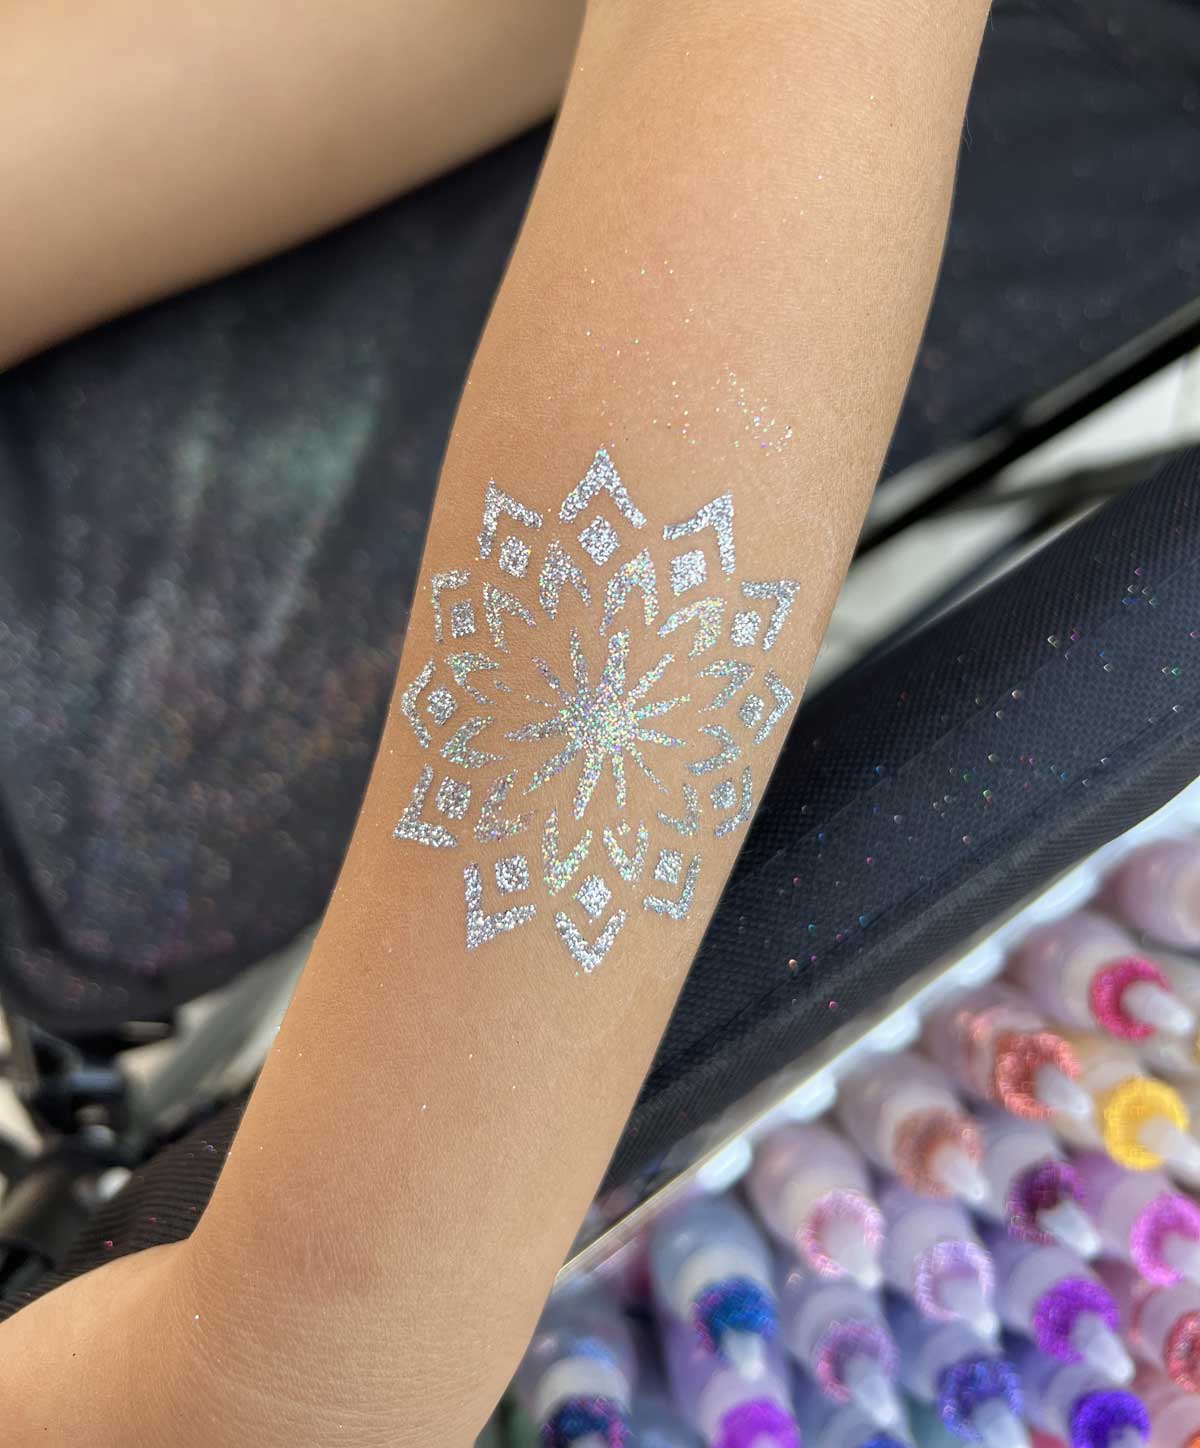 A glittering temporary tattoo of a mandala design on a person's arm.